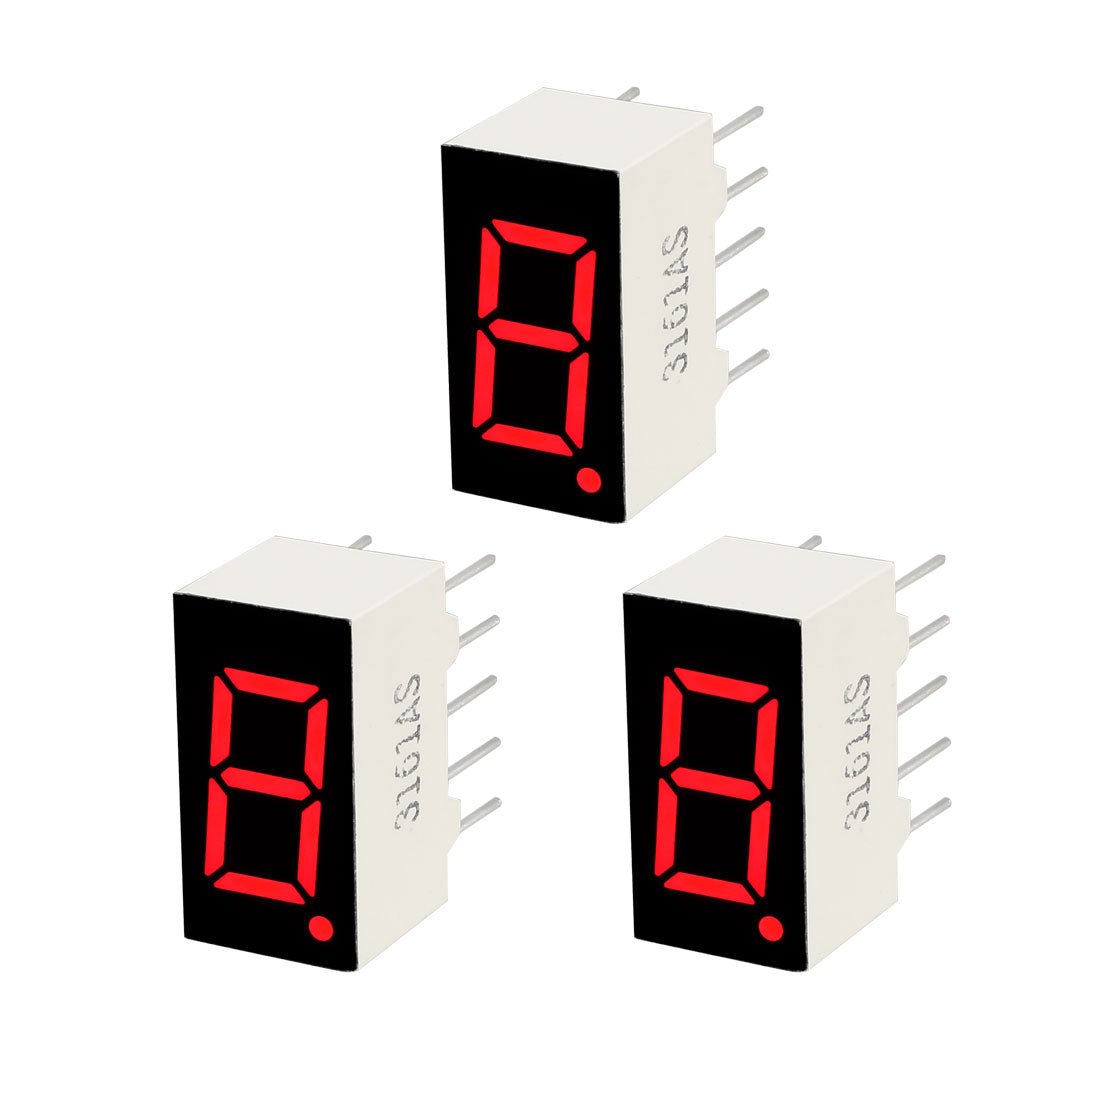 uxcell Uxcell Common Cathode 10 Pin 1 Bit 7 Segment 0.55 x 0.3 x 0.33 Inch 0.35" Red LED Display Digital Tube 3pcs